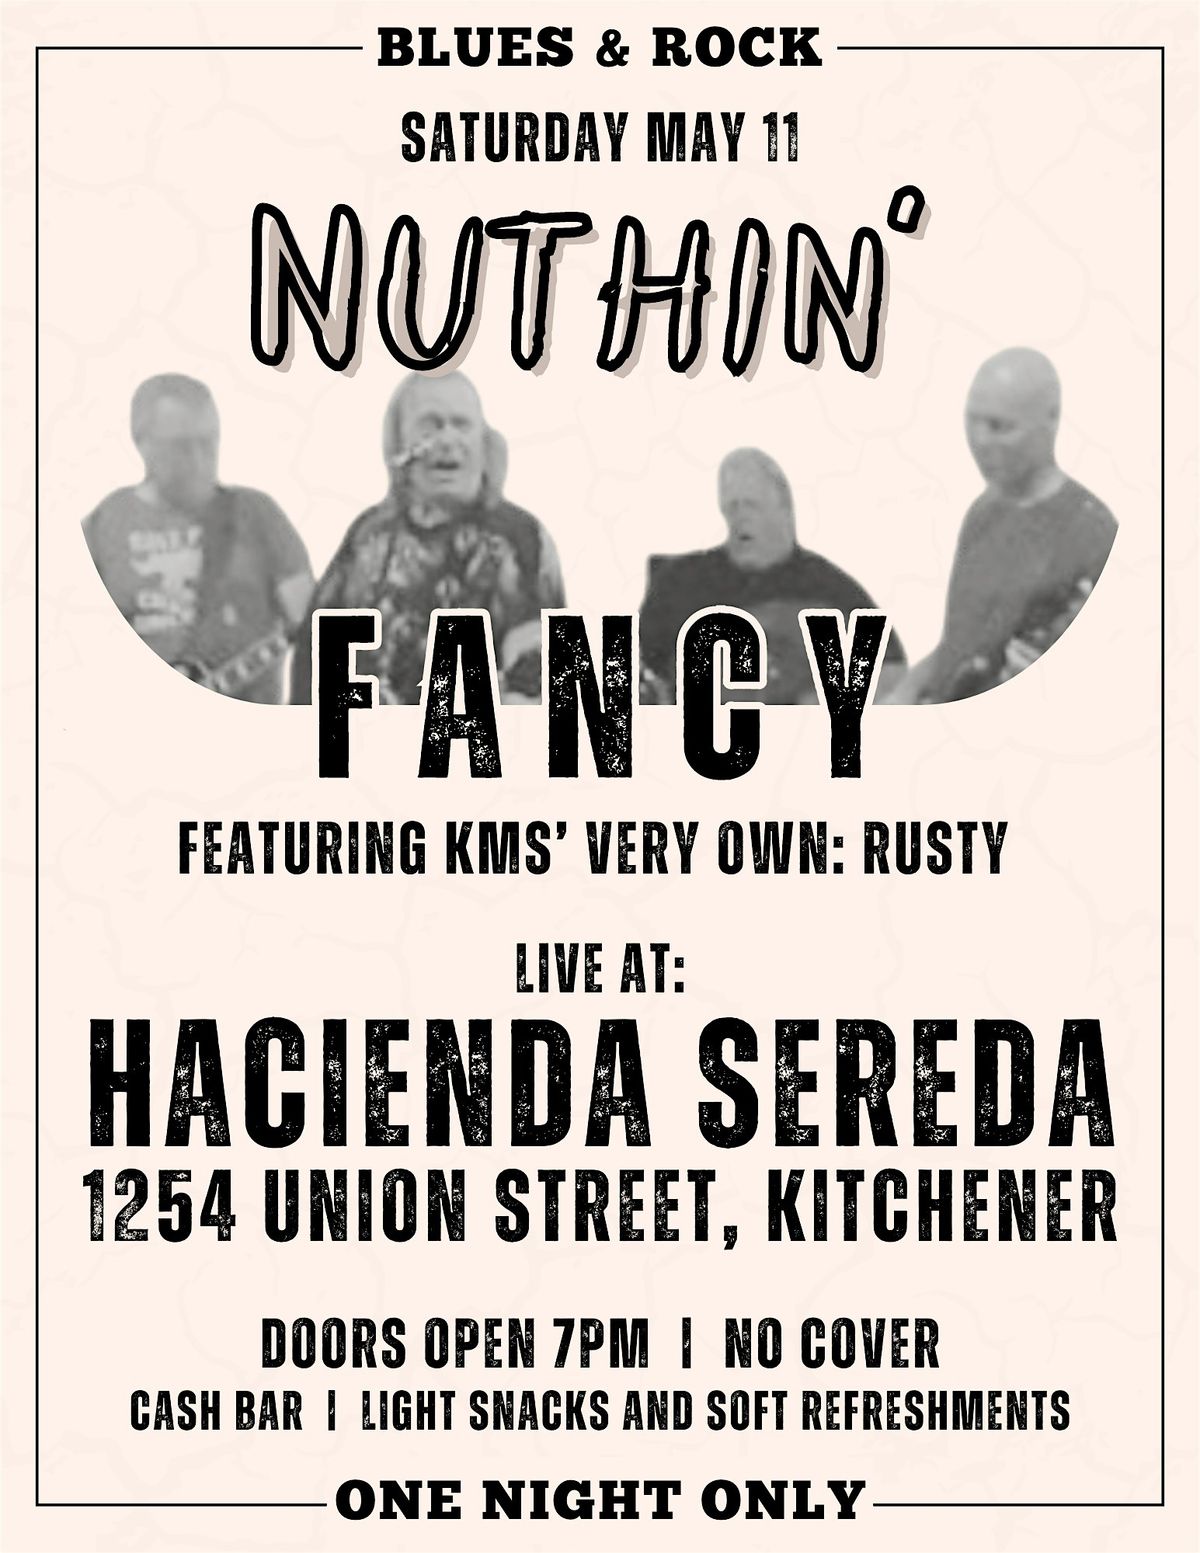 Nuthin' Fancy: Live at the Hacienda